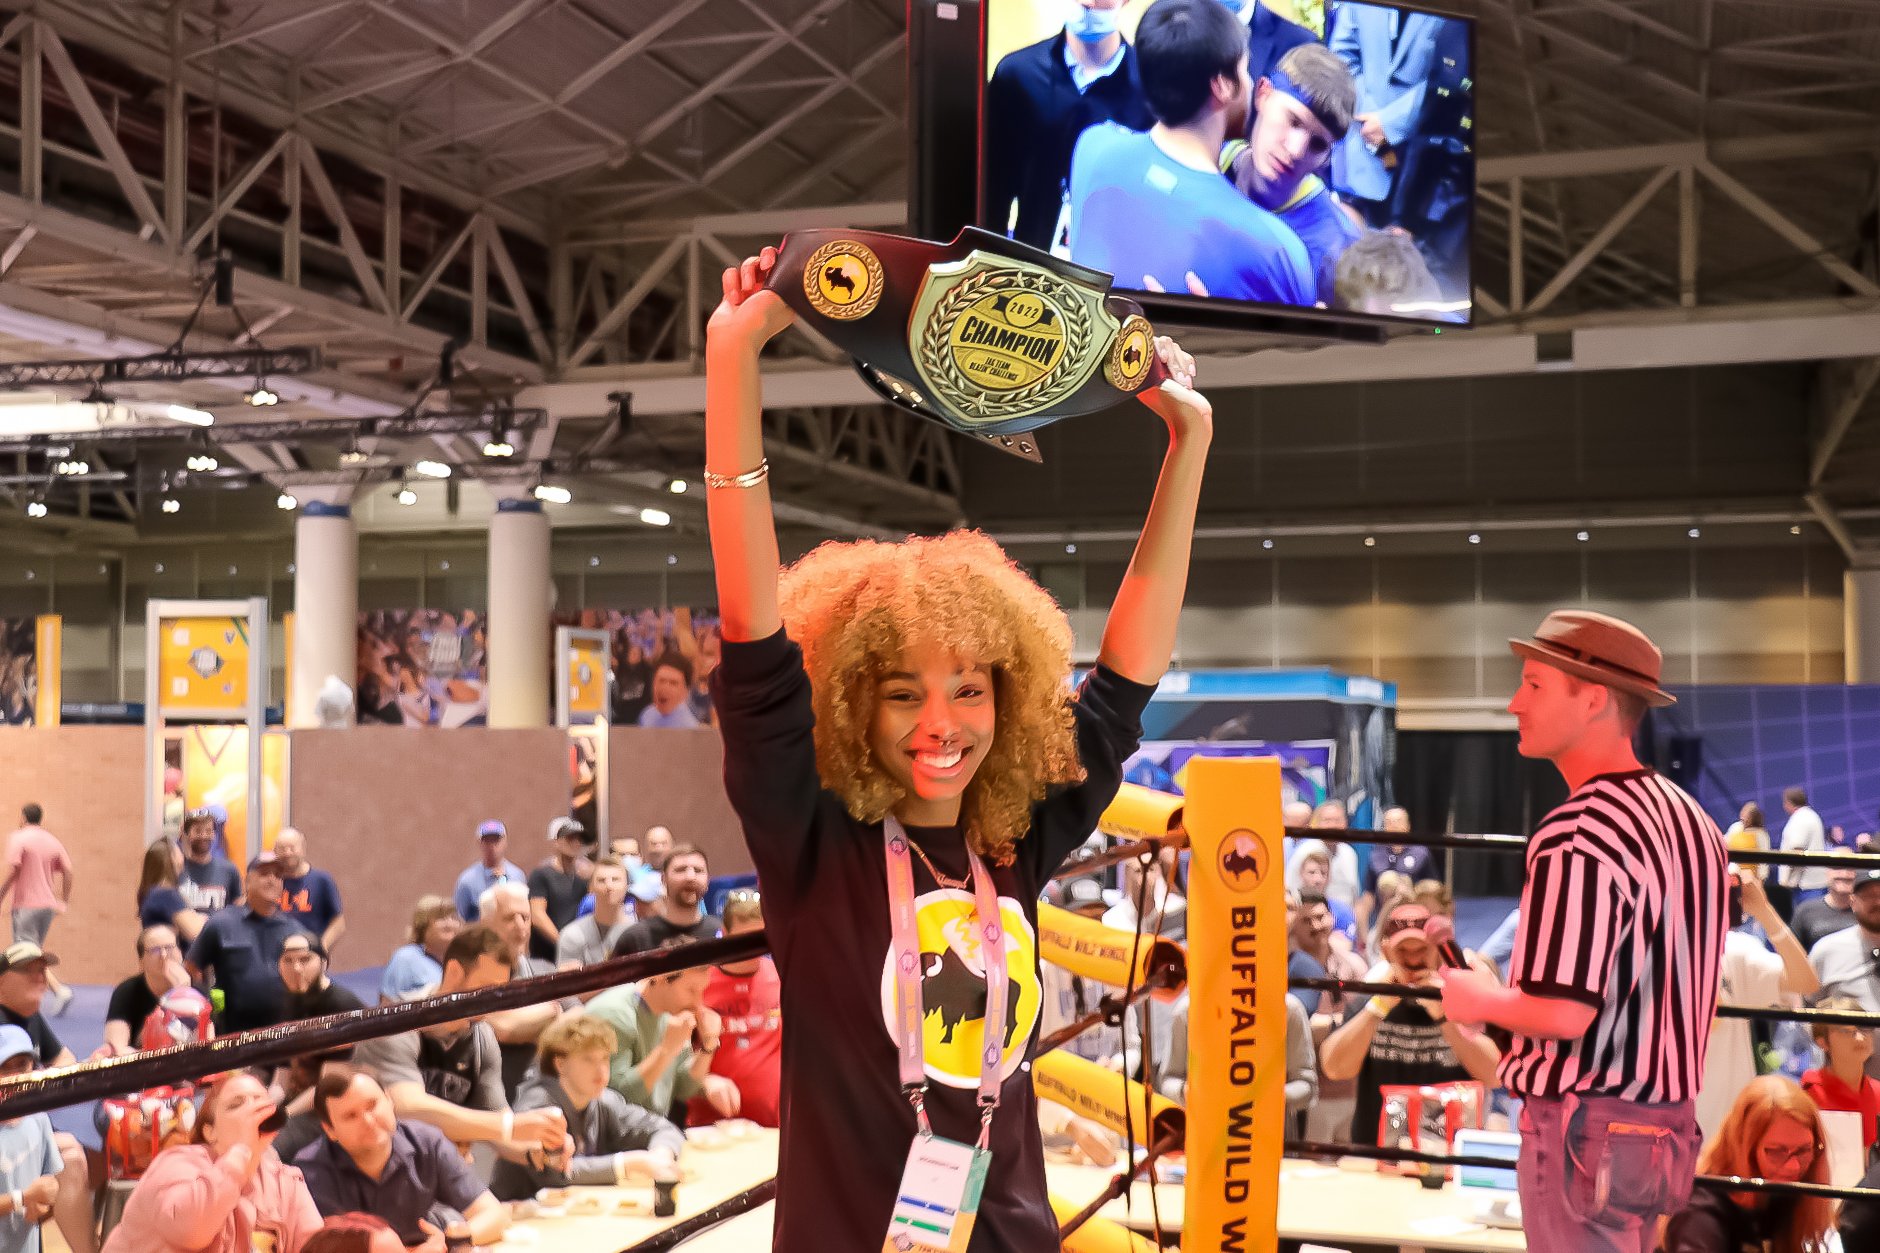 A black woman cheerfully holds up a wrestling belt at the Buffalo wild wings booth. Behind her is a small crowd. 